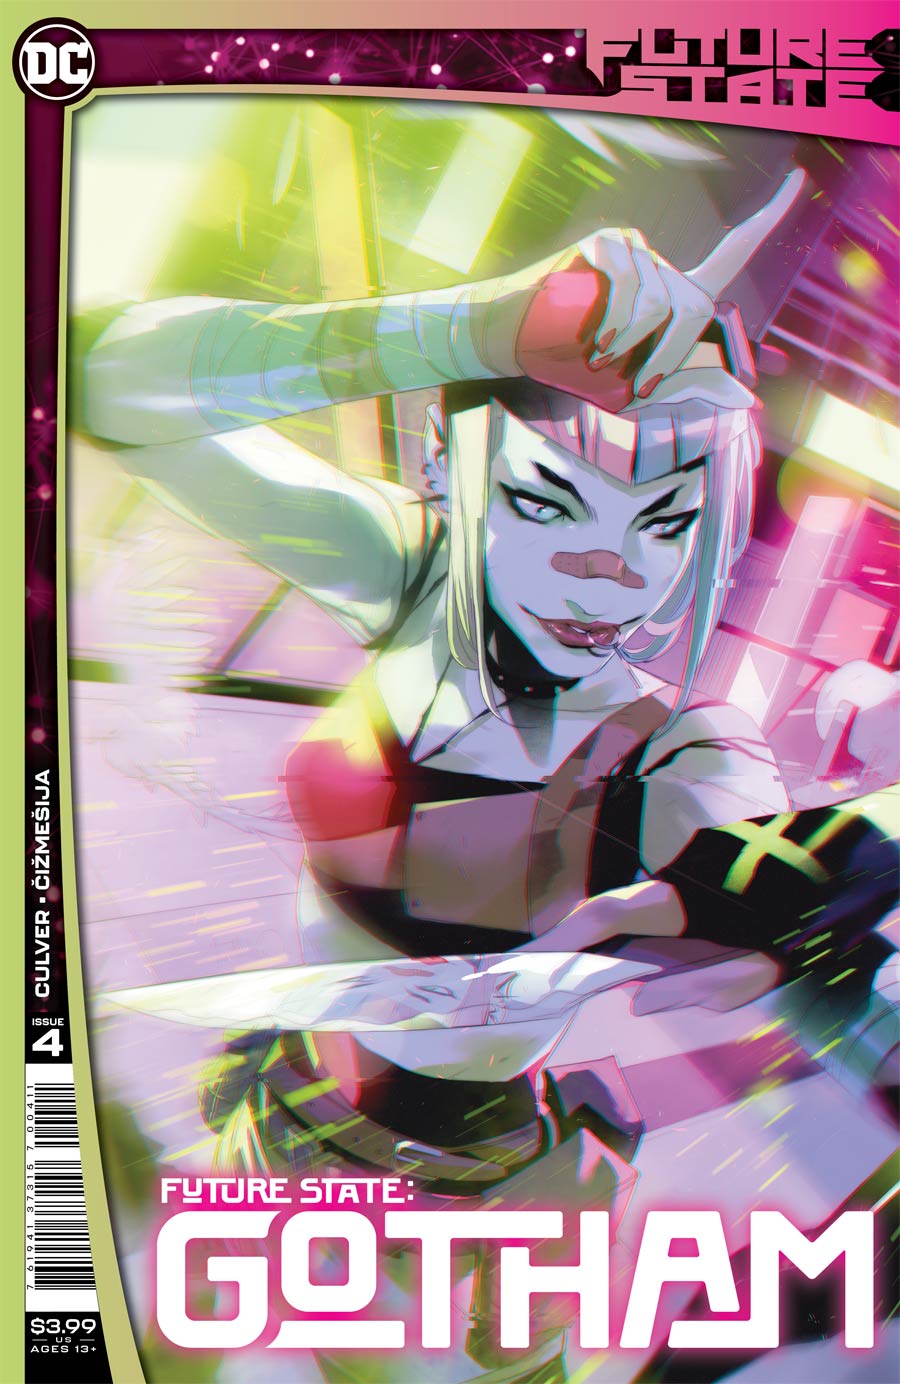 Future State Gotham #4 Cover A Regular Simone Di Meo Harley Quinn Connecting Cover